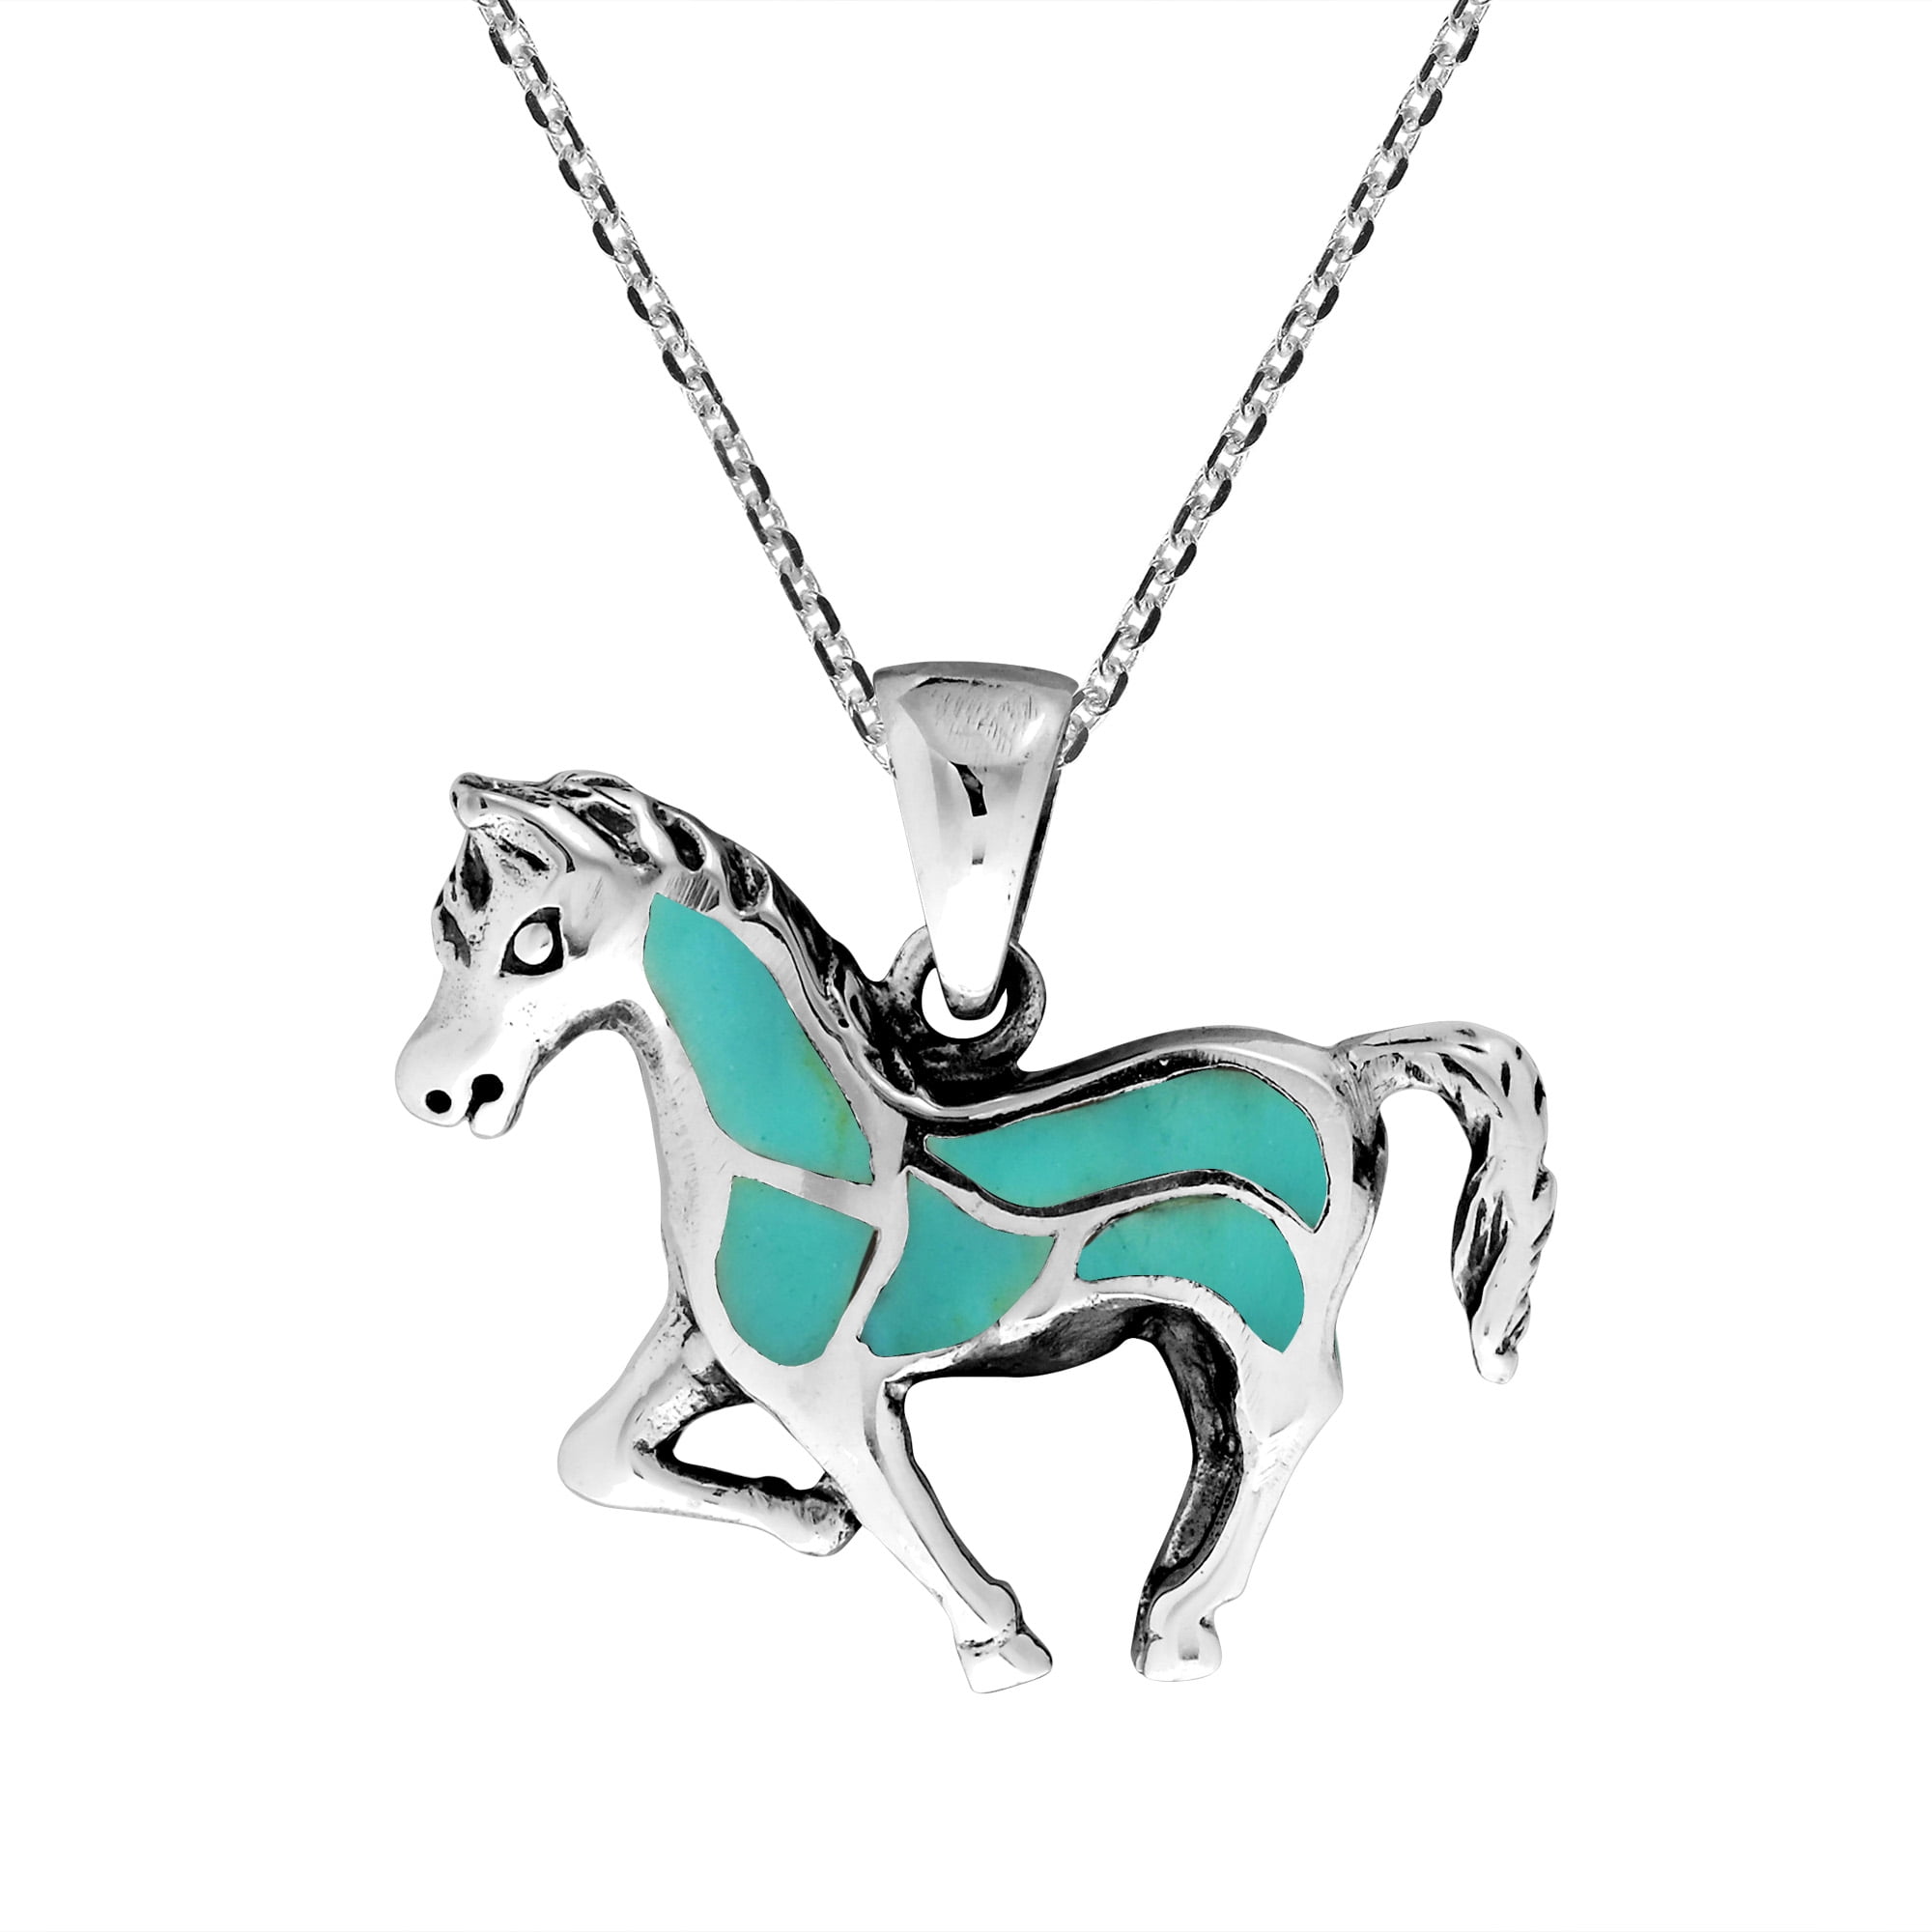 HORSE & WESTERN JEWELLERY JEWELRY LADIES HEART HORSE  MESSAGE  NECKLACE SILVER 